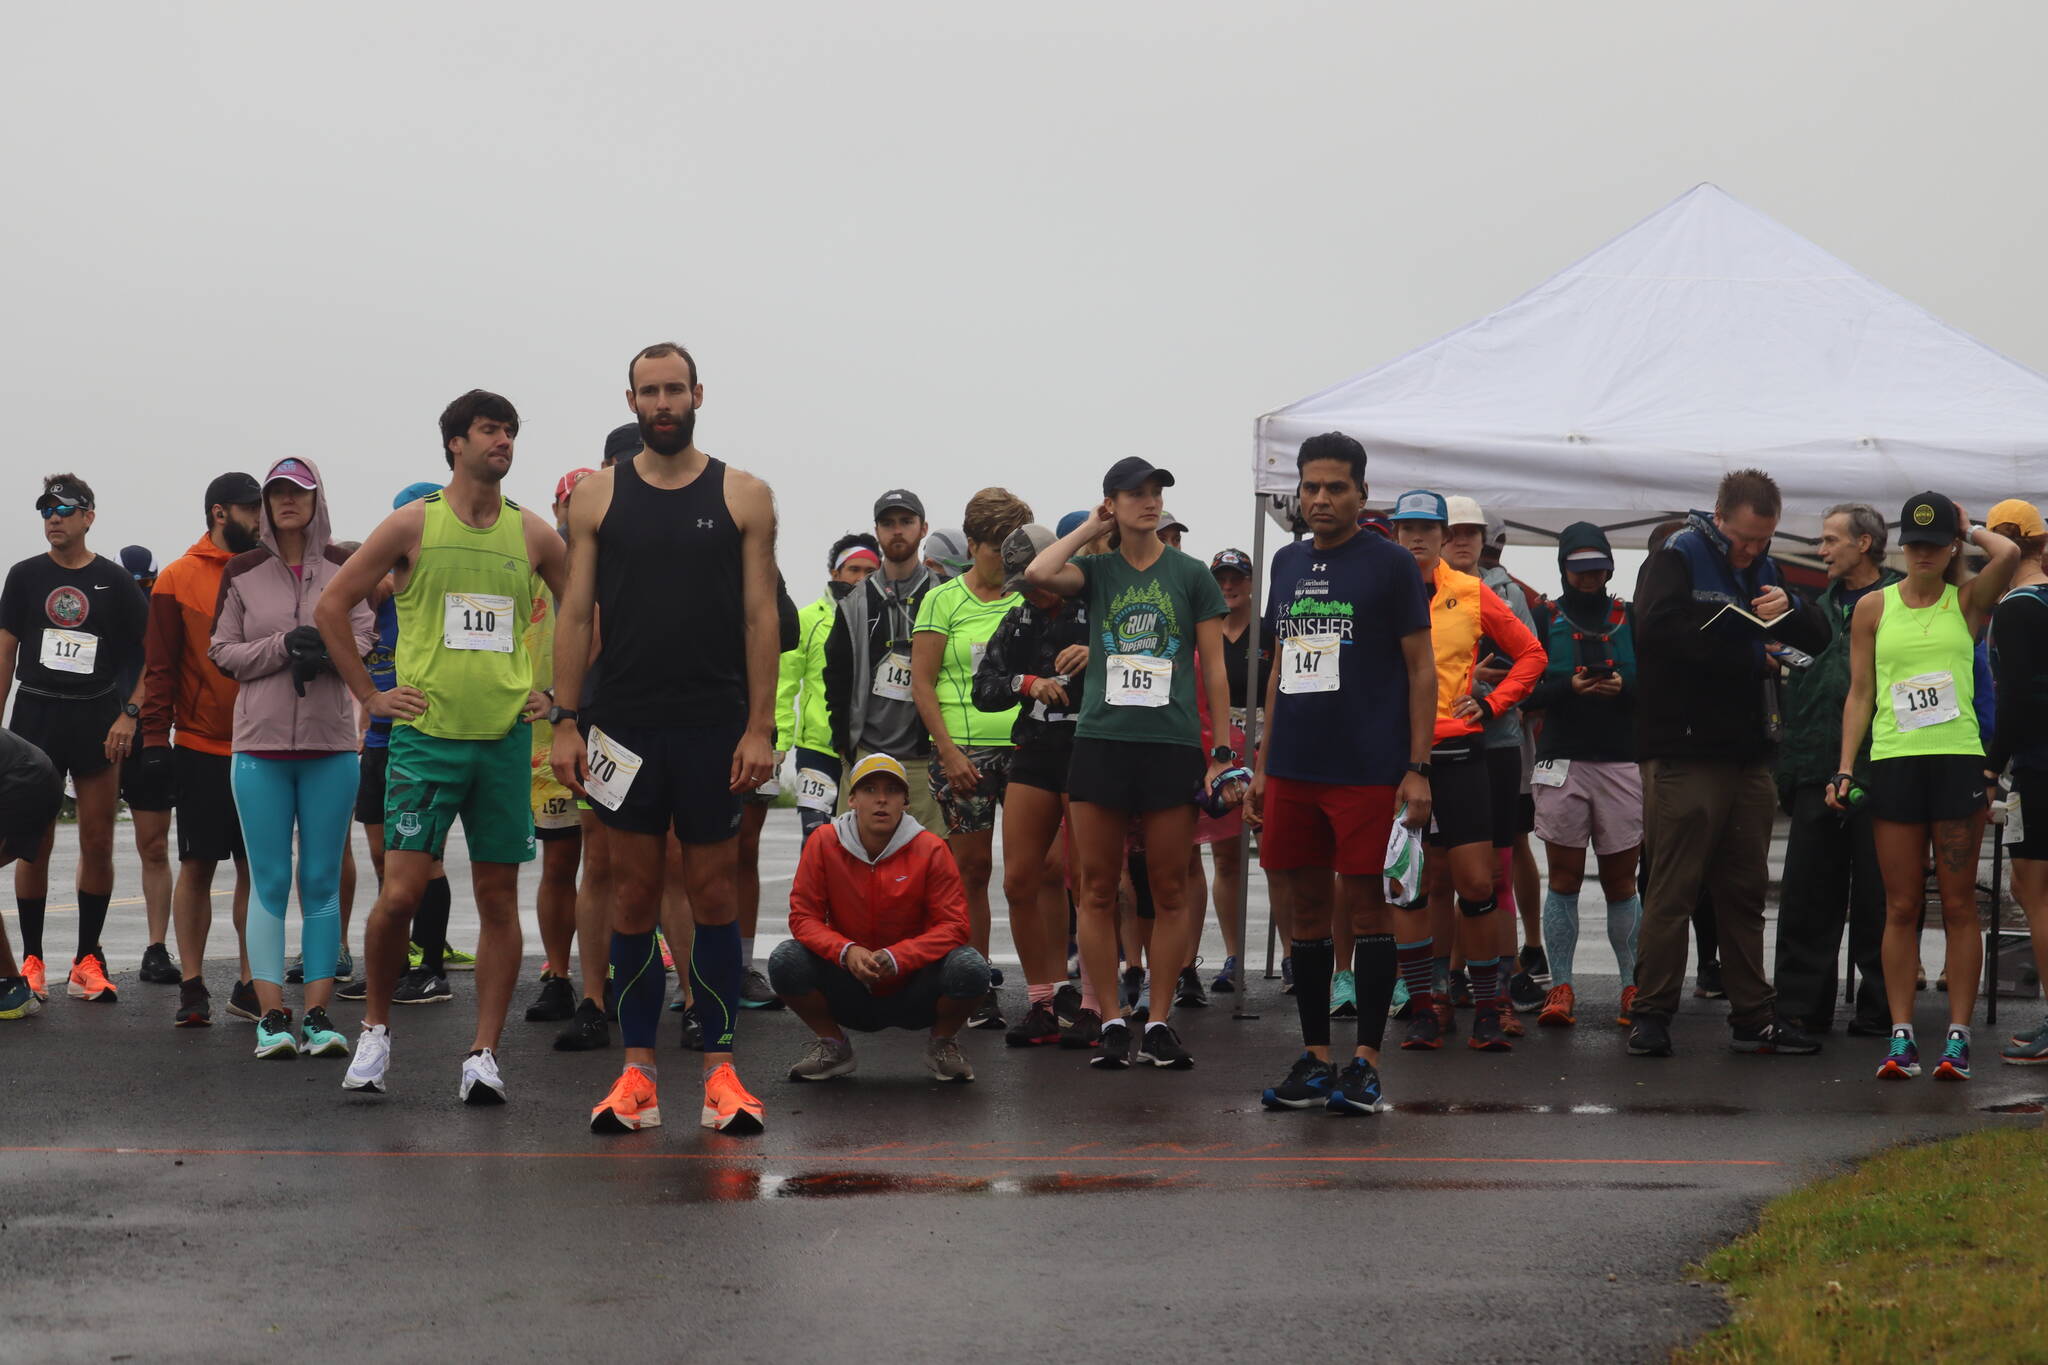 Three separate start times for this year’s 2022 Juneau Marathon, with the full marathon starting at 7 a.m. and the half marathon at 9 a.m. (Jonson Kuhn / Juneau Empire)